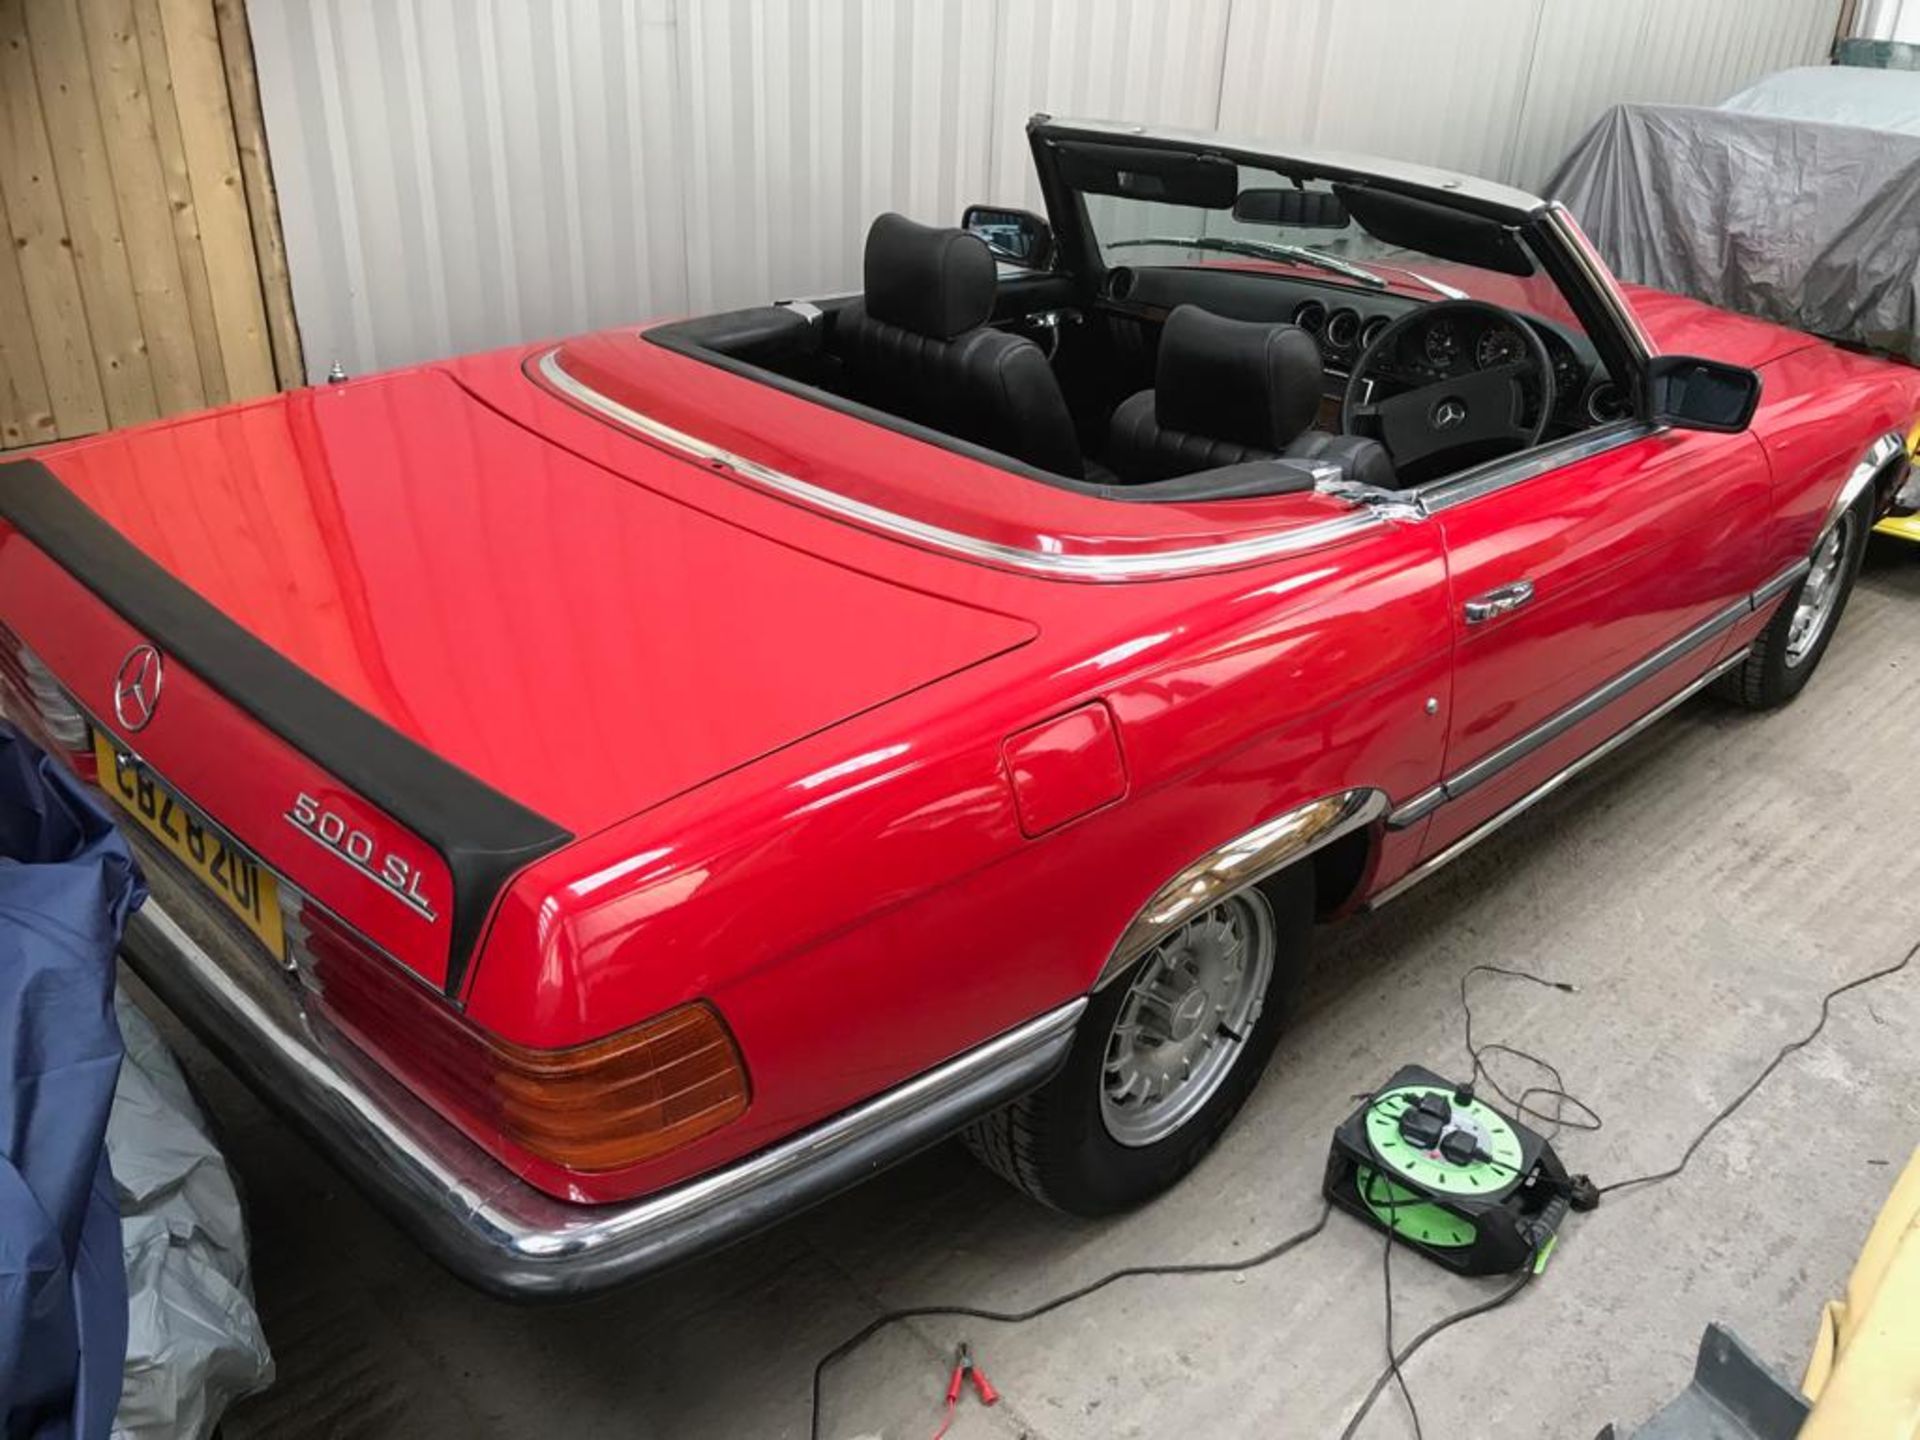 Mercedes 500SL R107 - 69,938 Miles - CL331 - Location: Manchester - No VAT on the hammer! This 500SL - Image 2 of 11